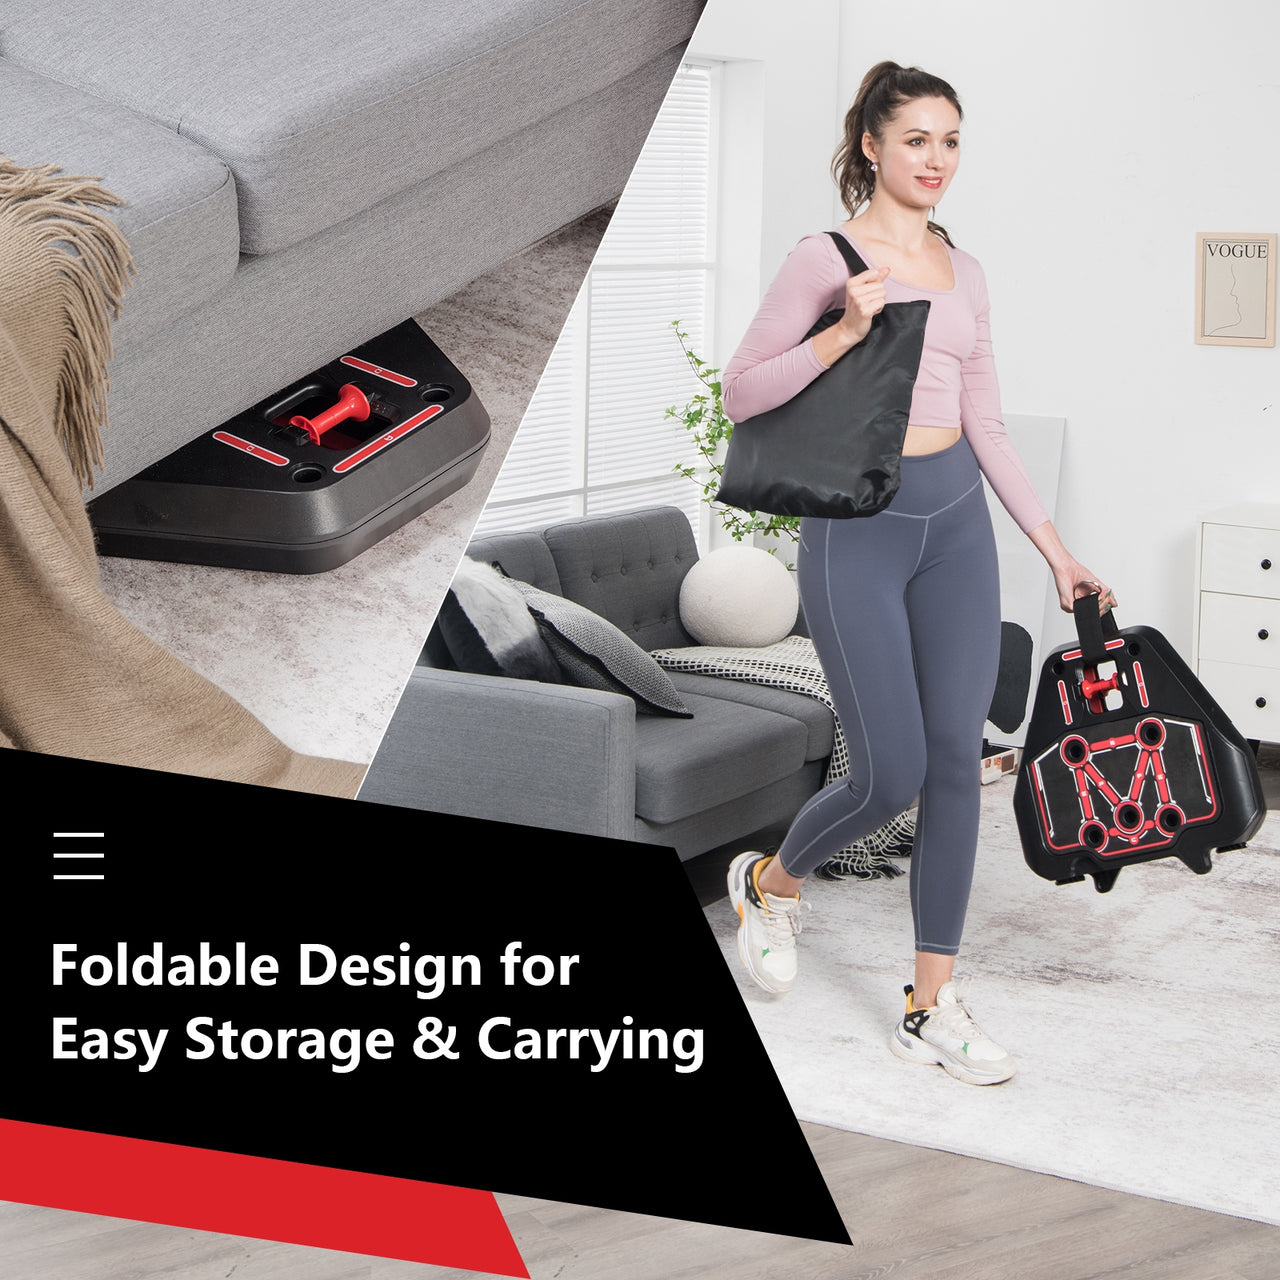 All-in-one Portable Pushup Board with Bag - Gallery View 7 of 13